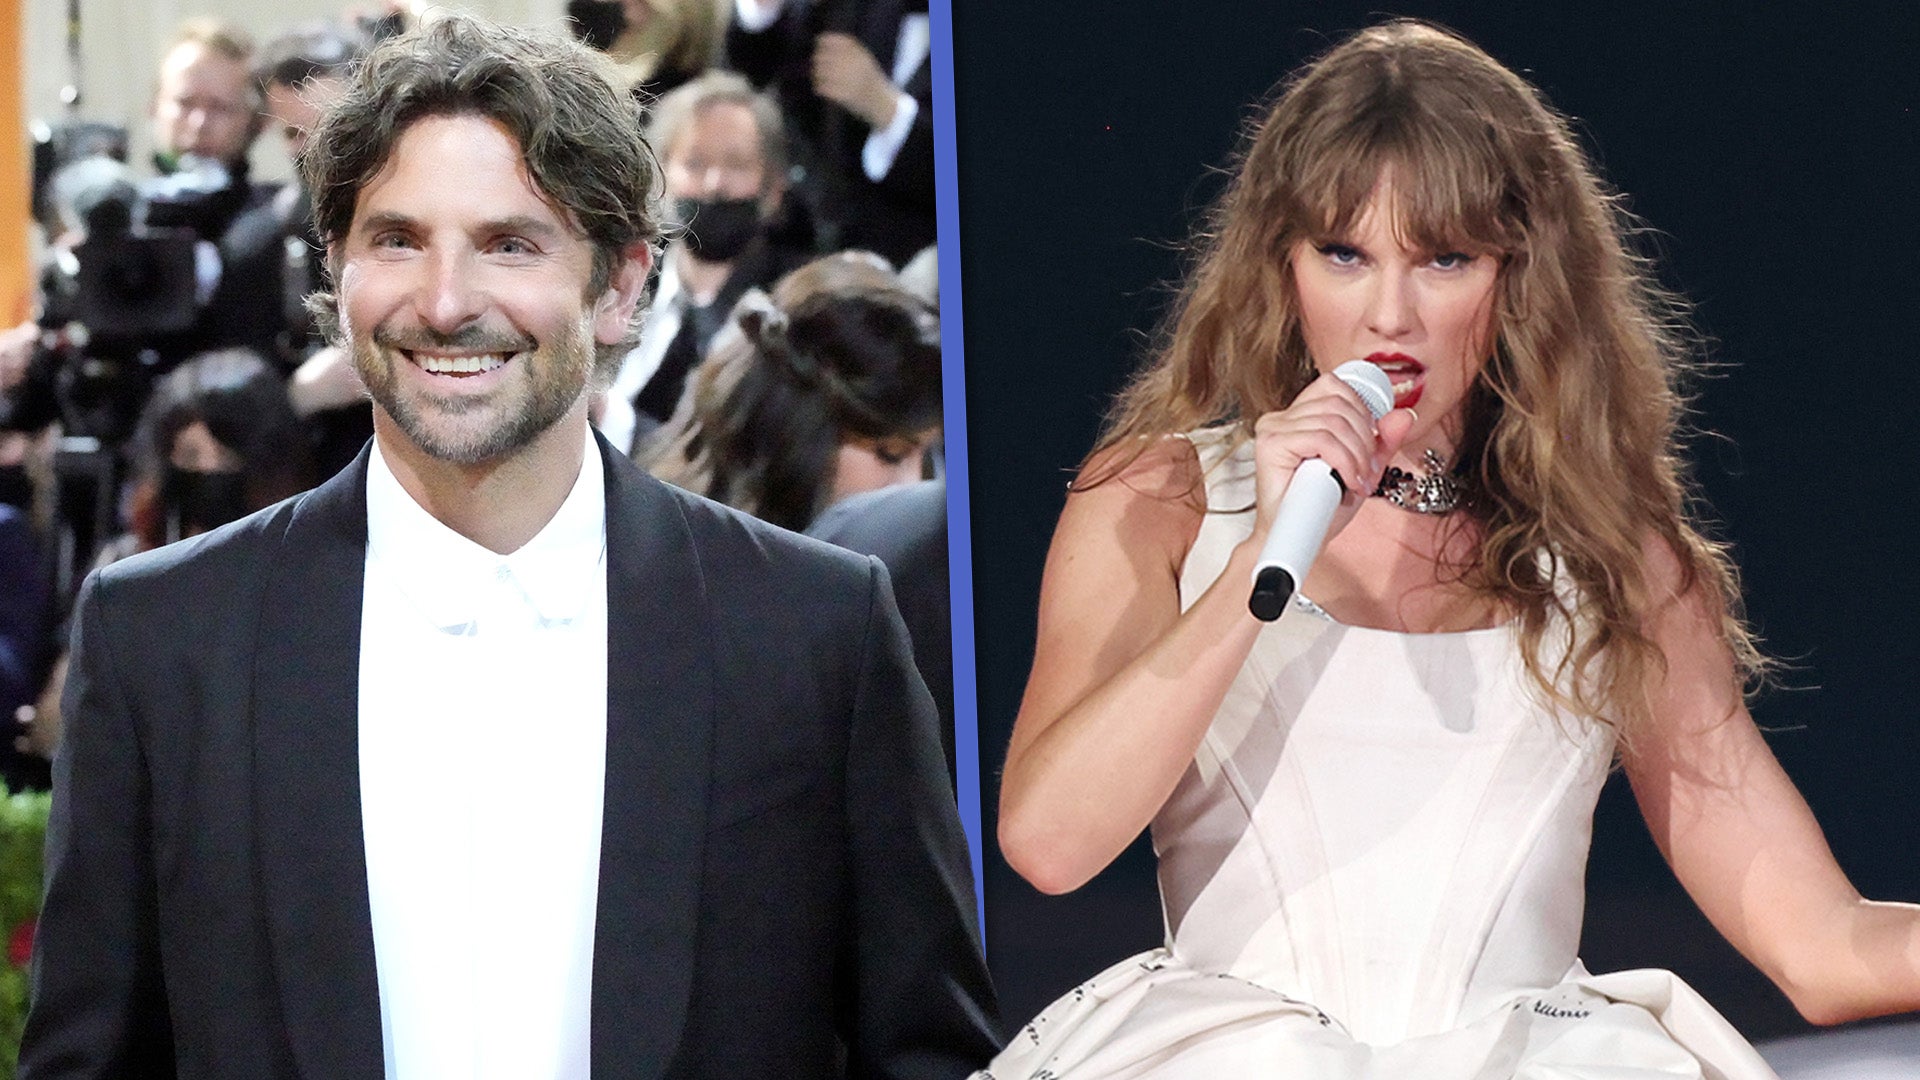 Watch Bradley Cooper’s Viral Dance Moves at Taylor Swift’s Eras Tour